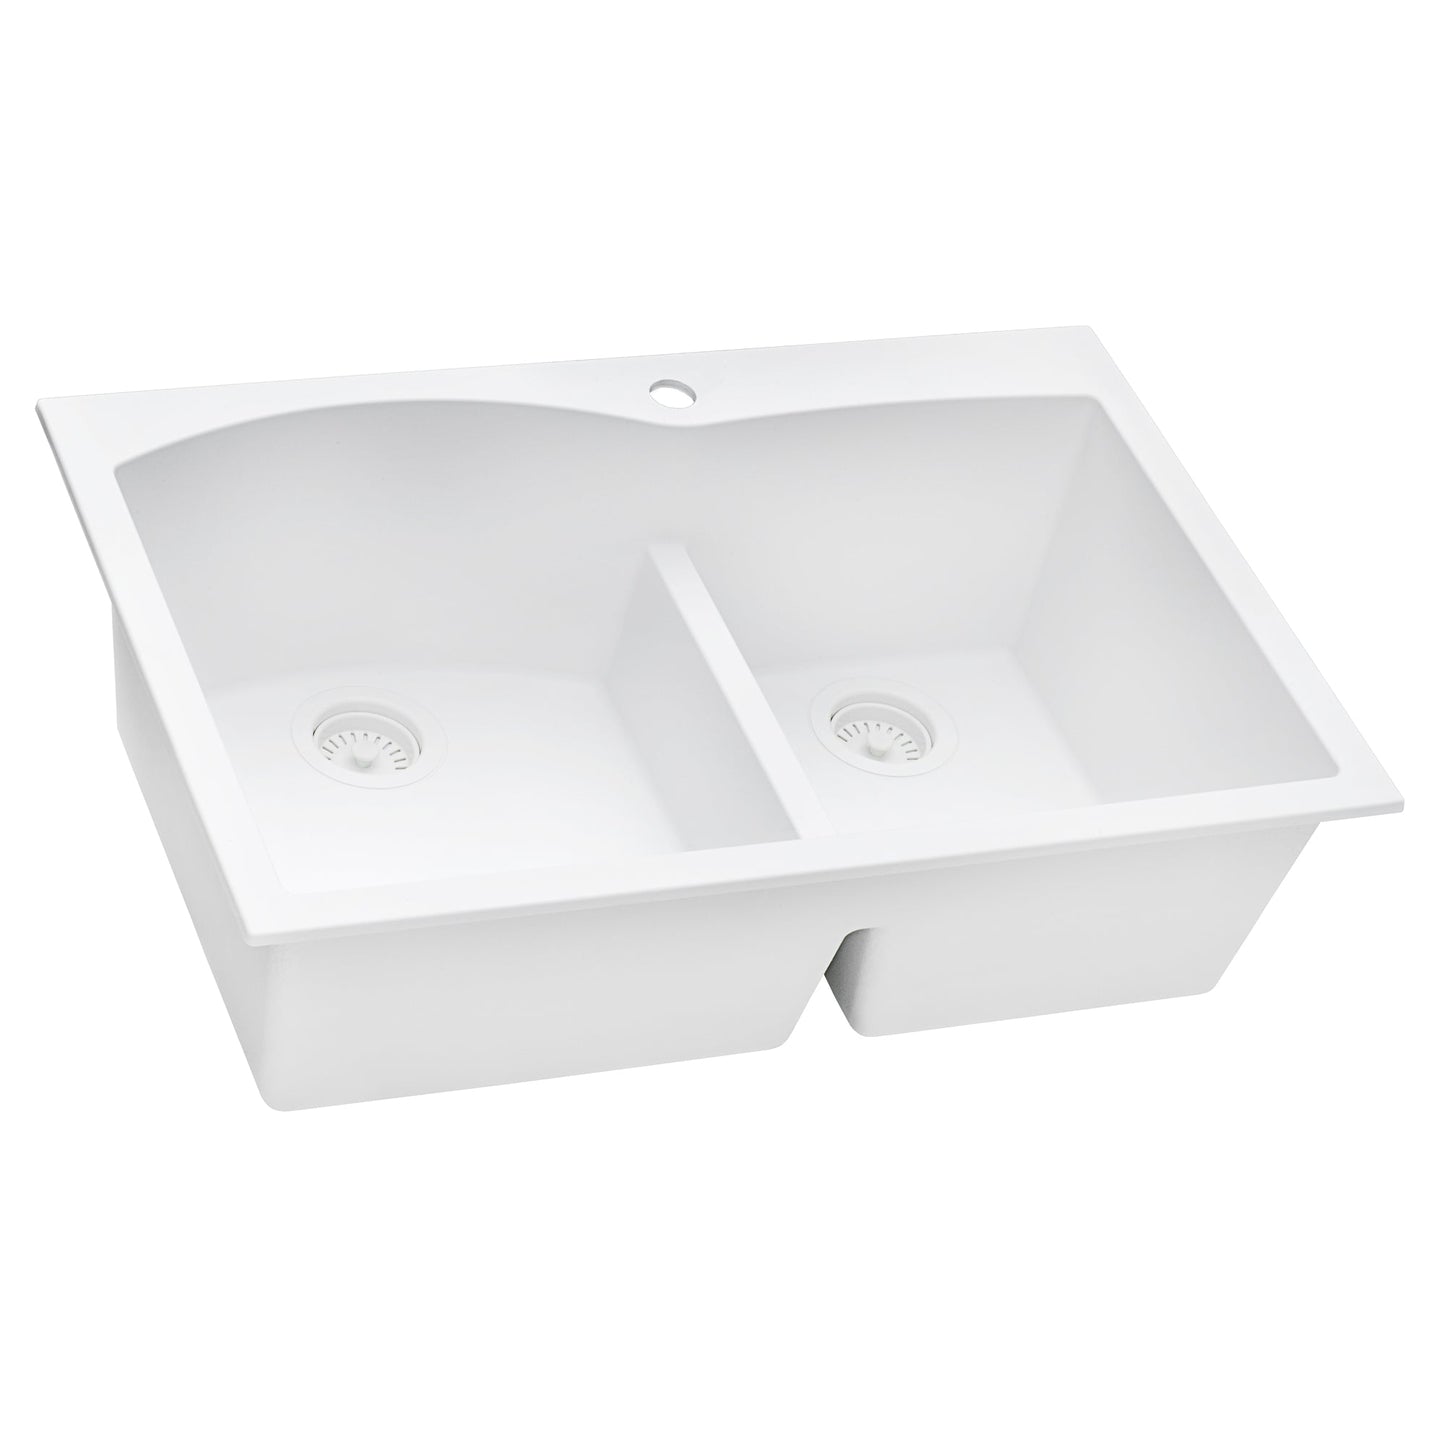 Ruvati epiGranite 33" x 22 Arctic White Drop-In Topmount Granite 60/40 Double Bowl Kitchen Sink With Basket Strainer and Drain Assembly